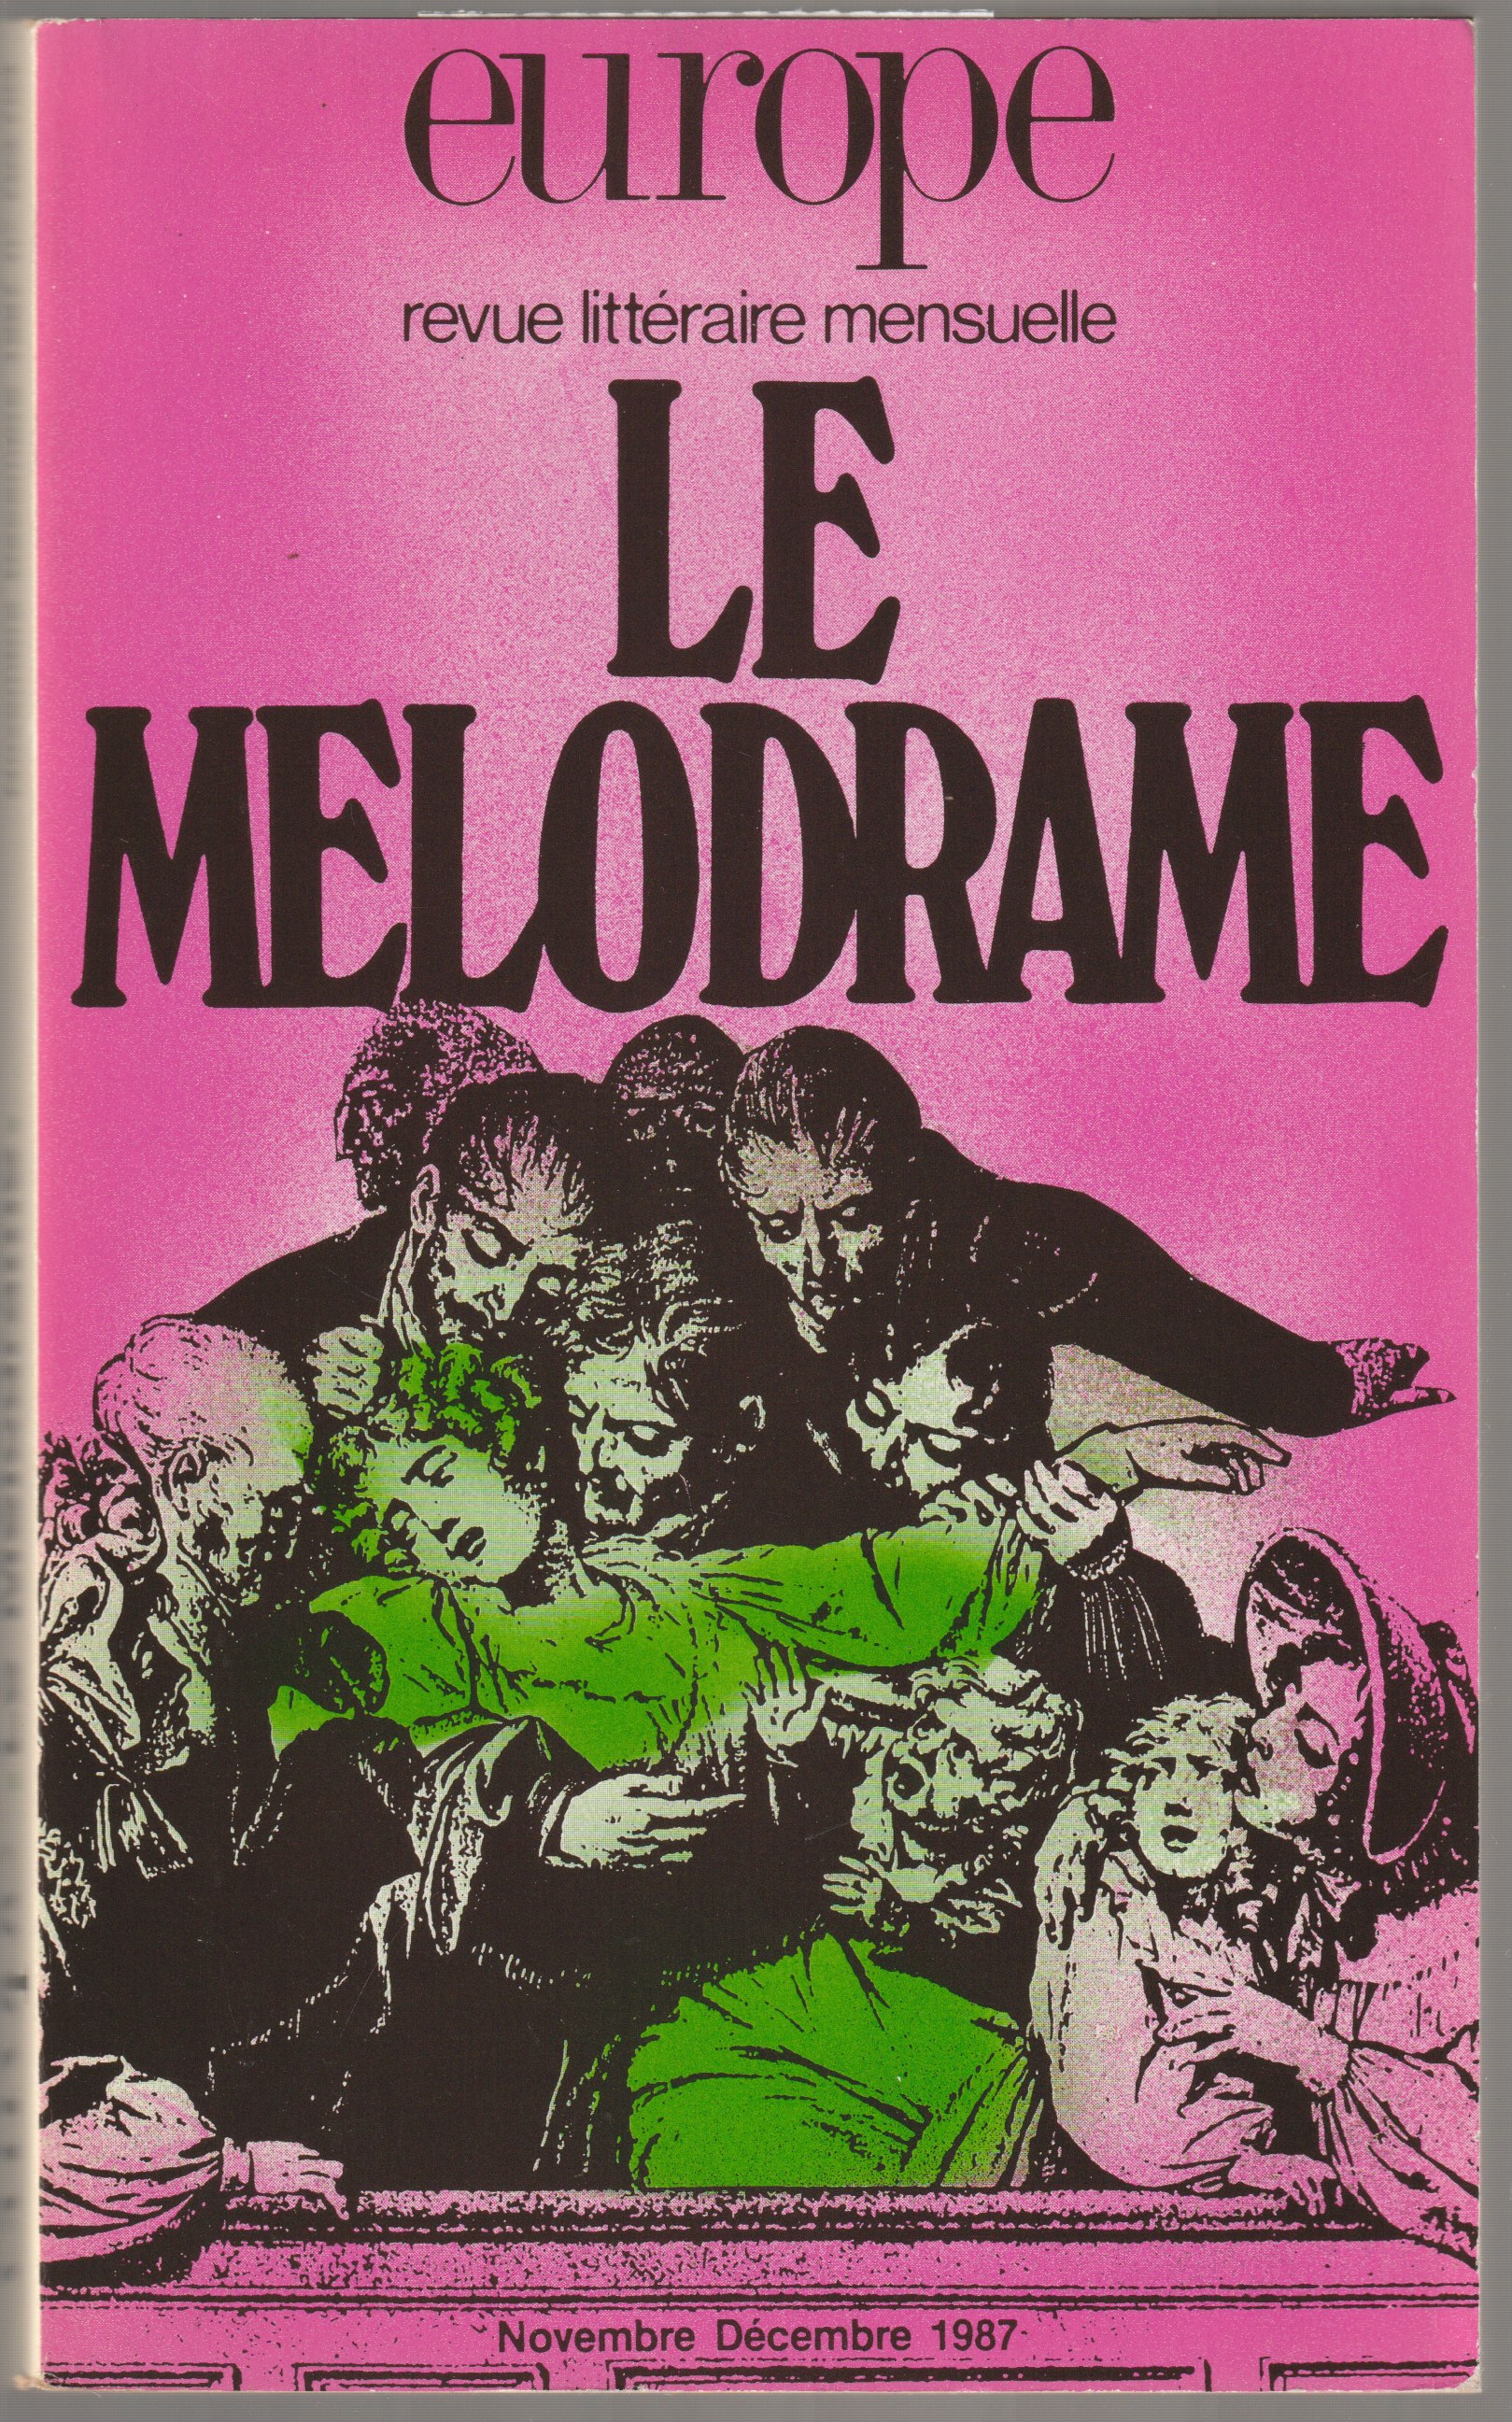 Le melodrame.